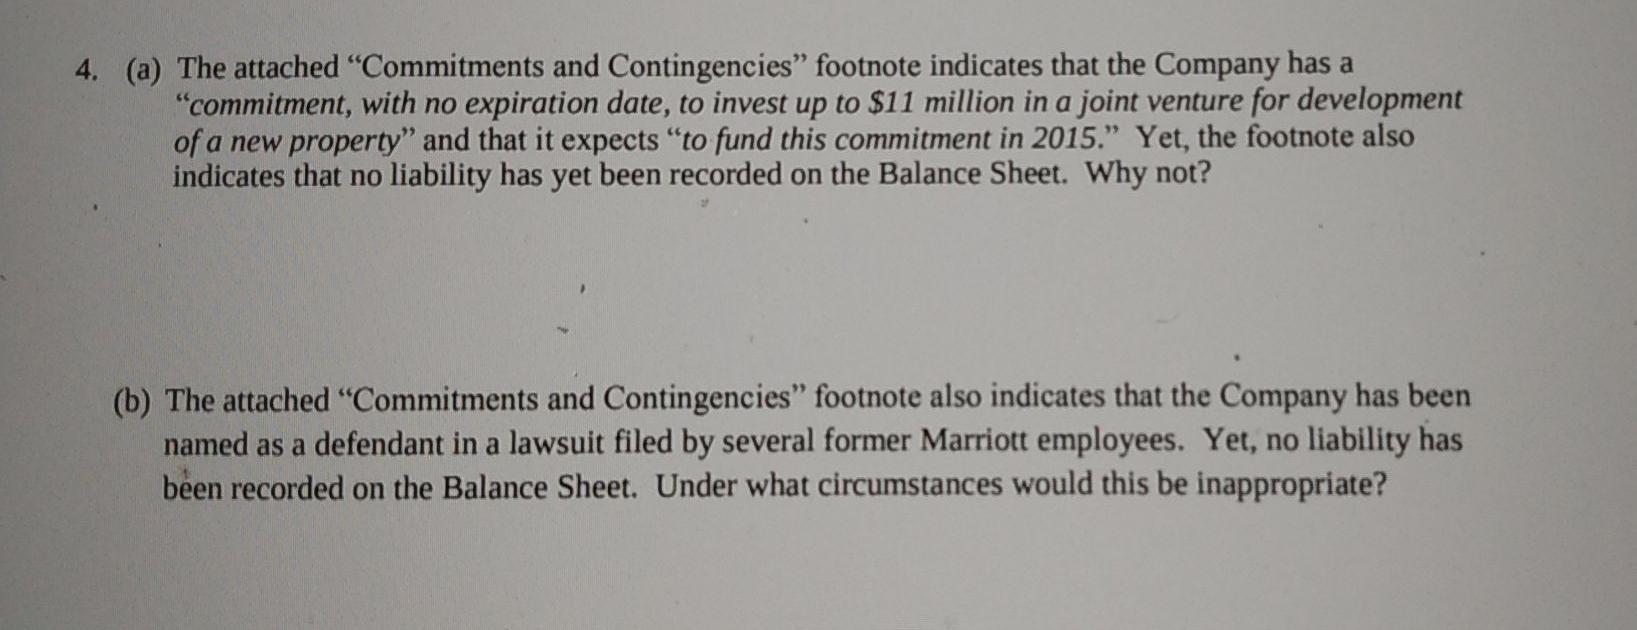 4. (a) The attached Commitments and Contingencies” footnote indicates that the Company has a commitment, with no expiration